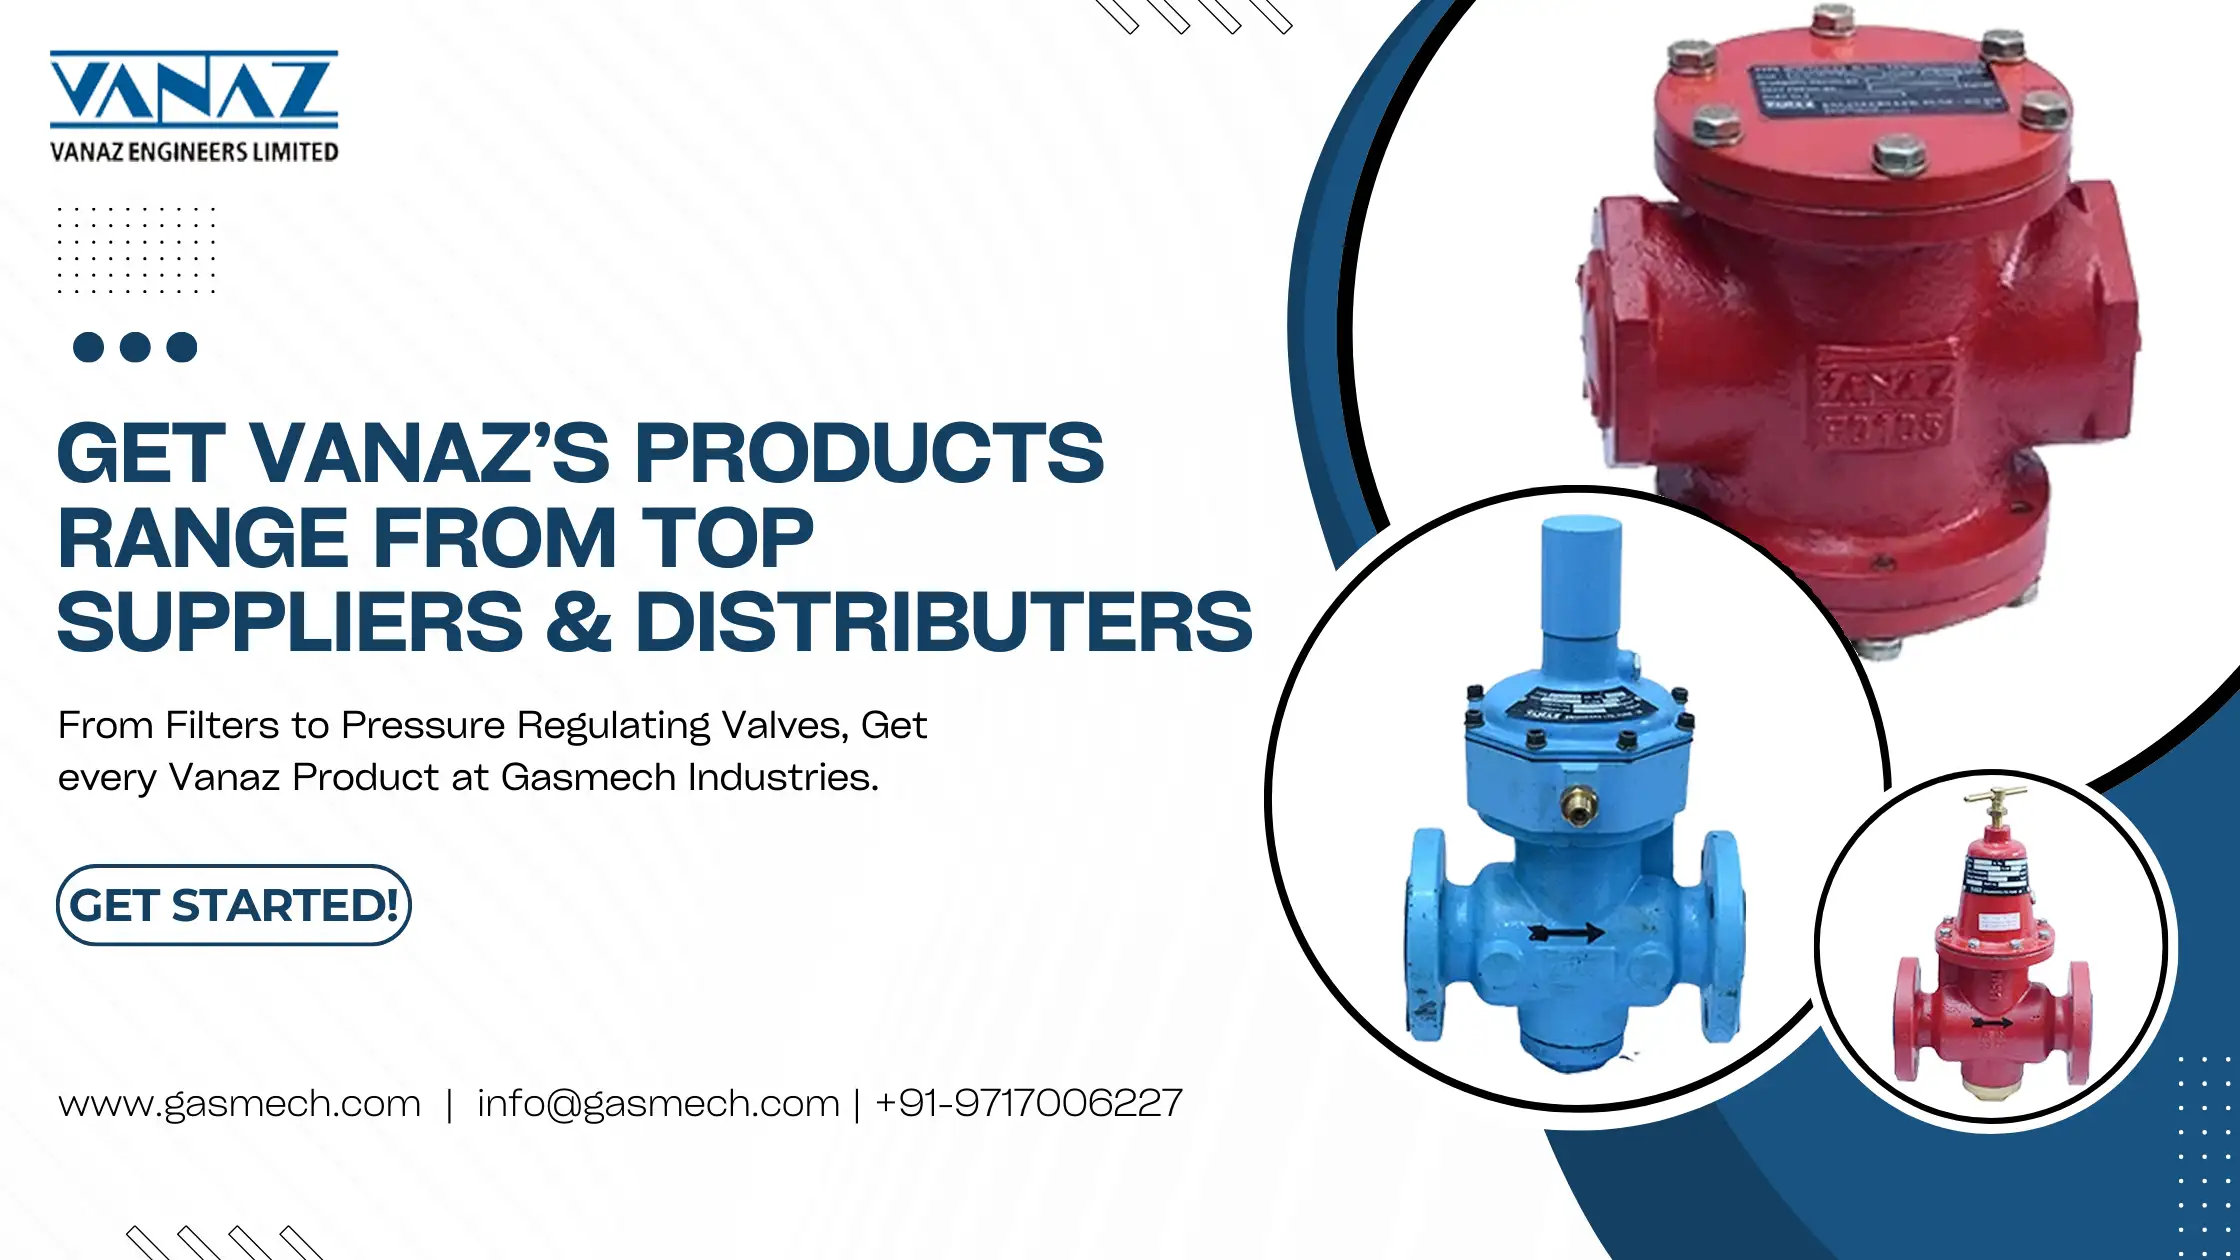 Vanaz Industrial Product's with Gasmech's Distributing Support